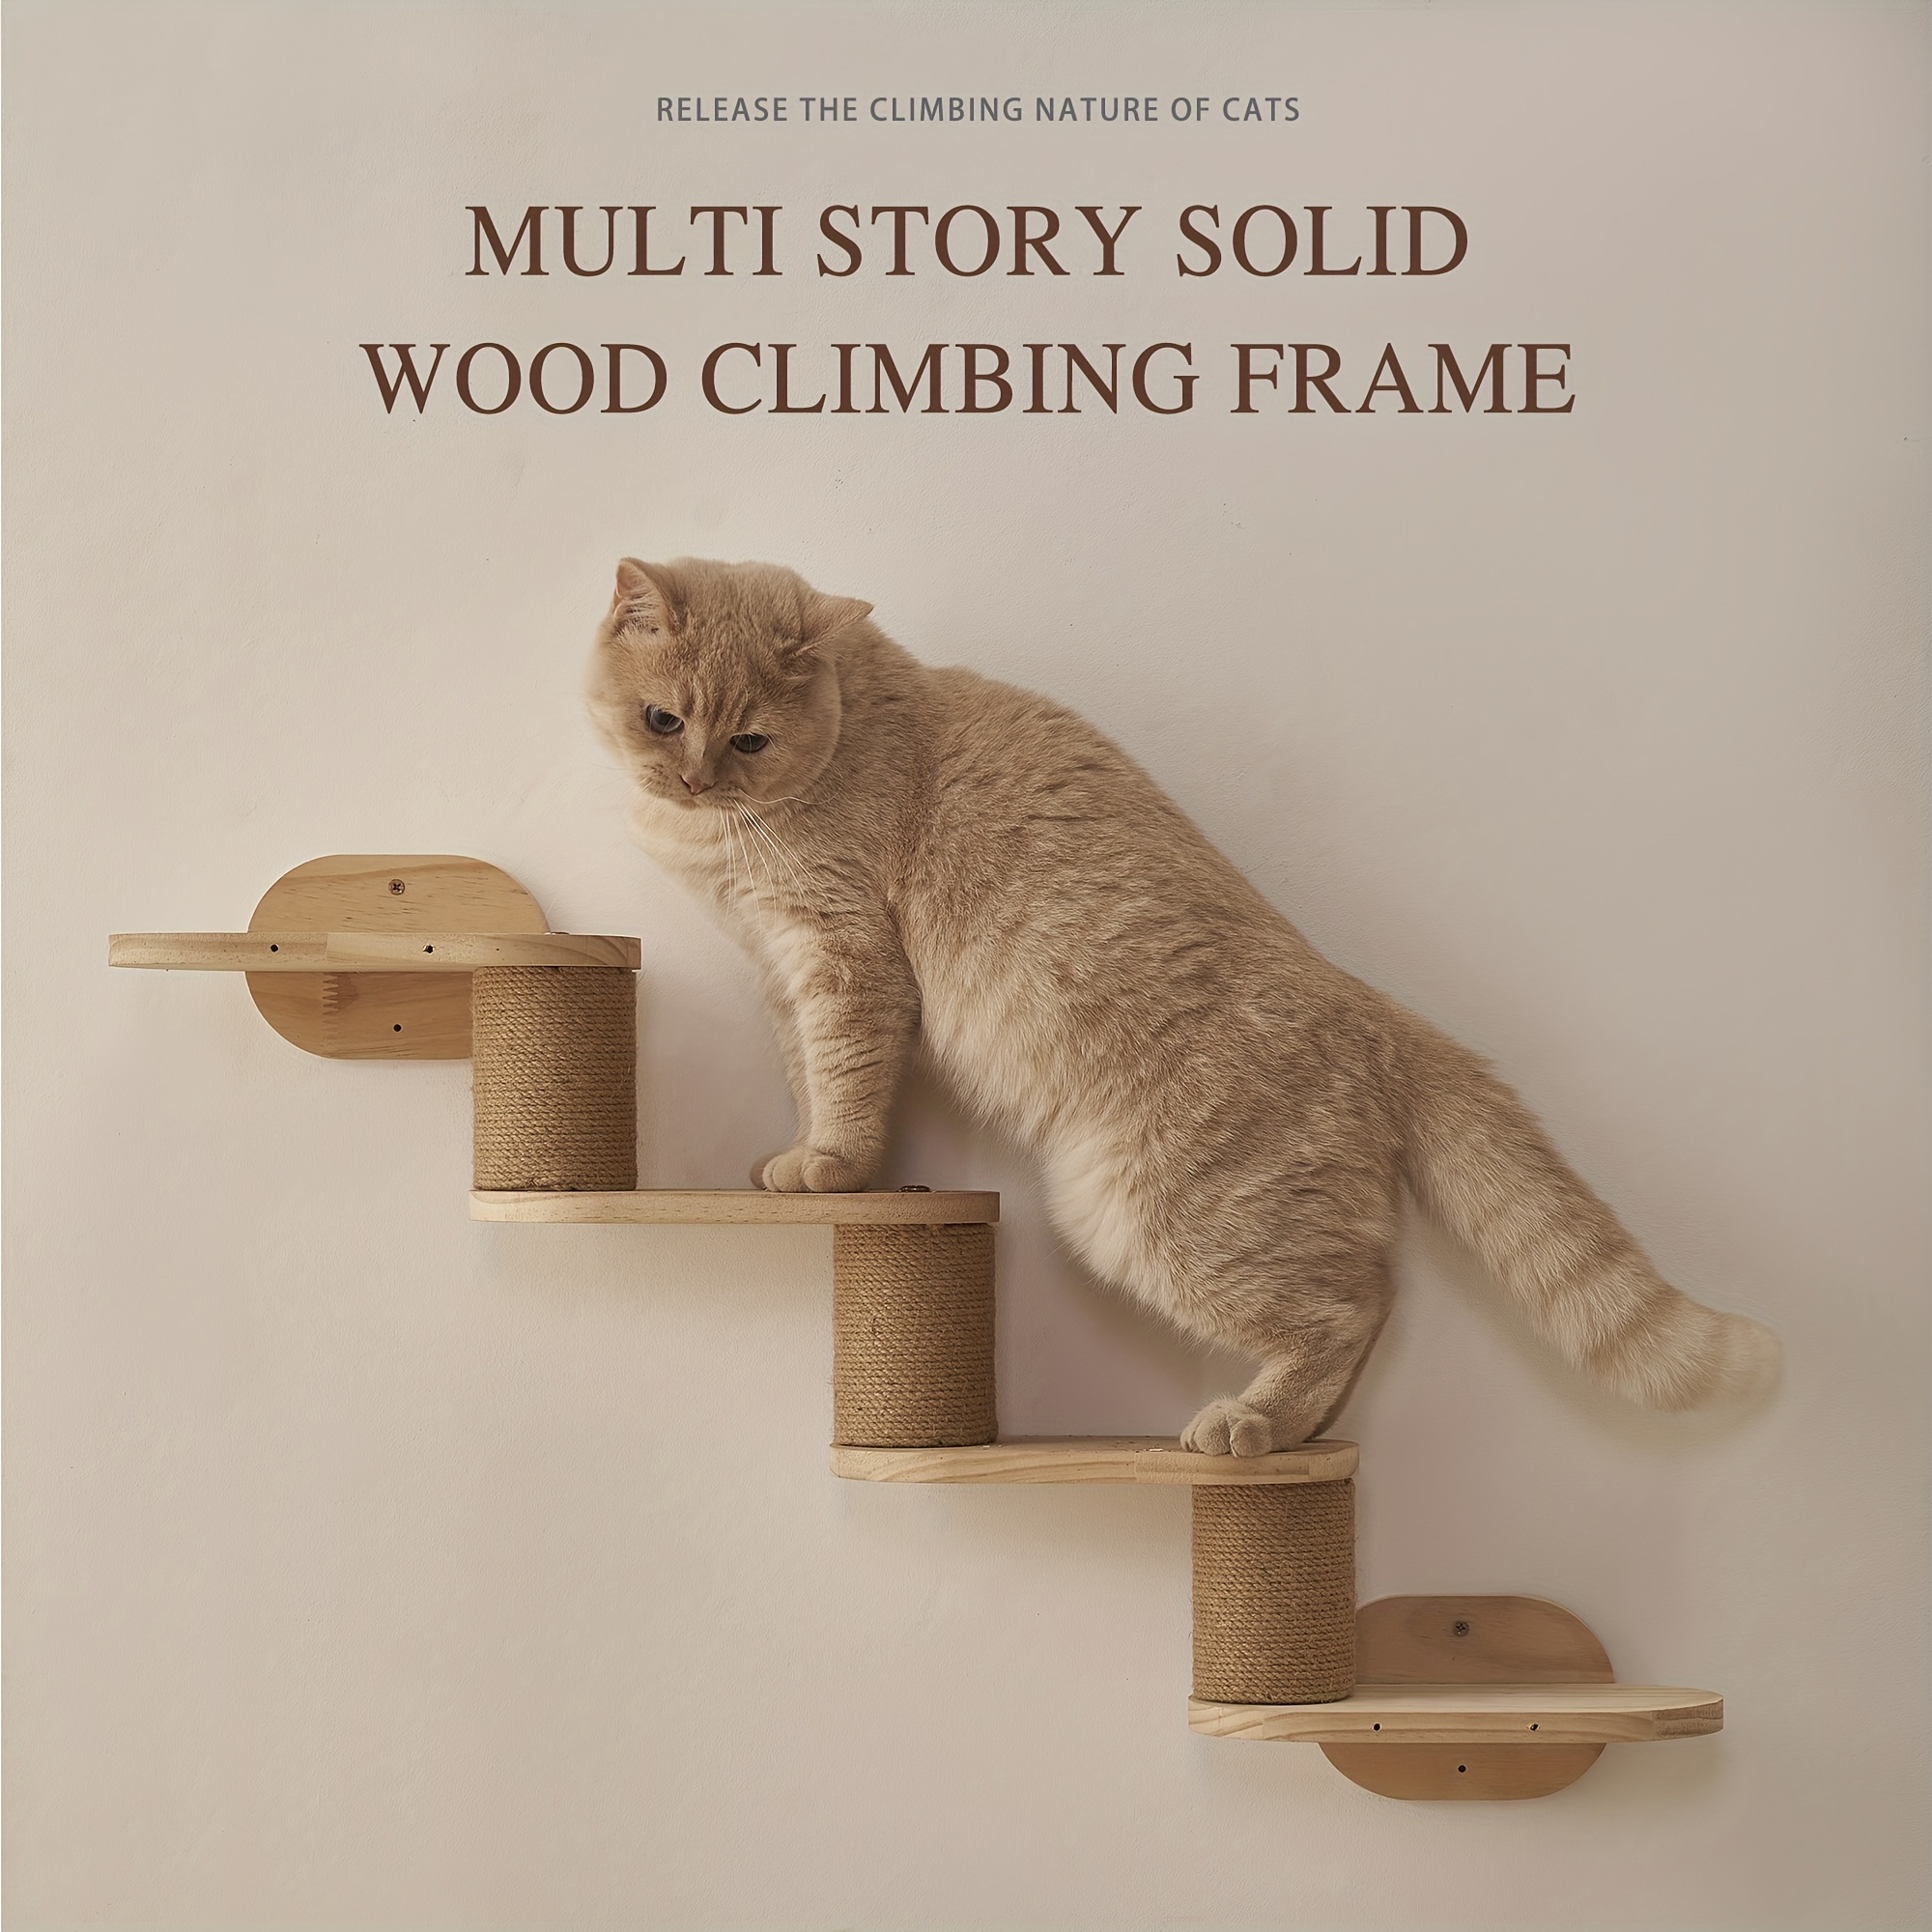 

Wooden Wall-mounted Cat Bed, Household Wall Jumping Platform Sisal Cat Scratching Post, Cat Climbing Frame For All Seasons